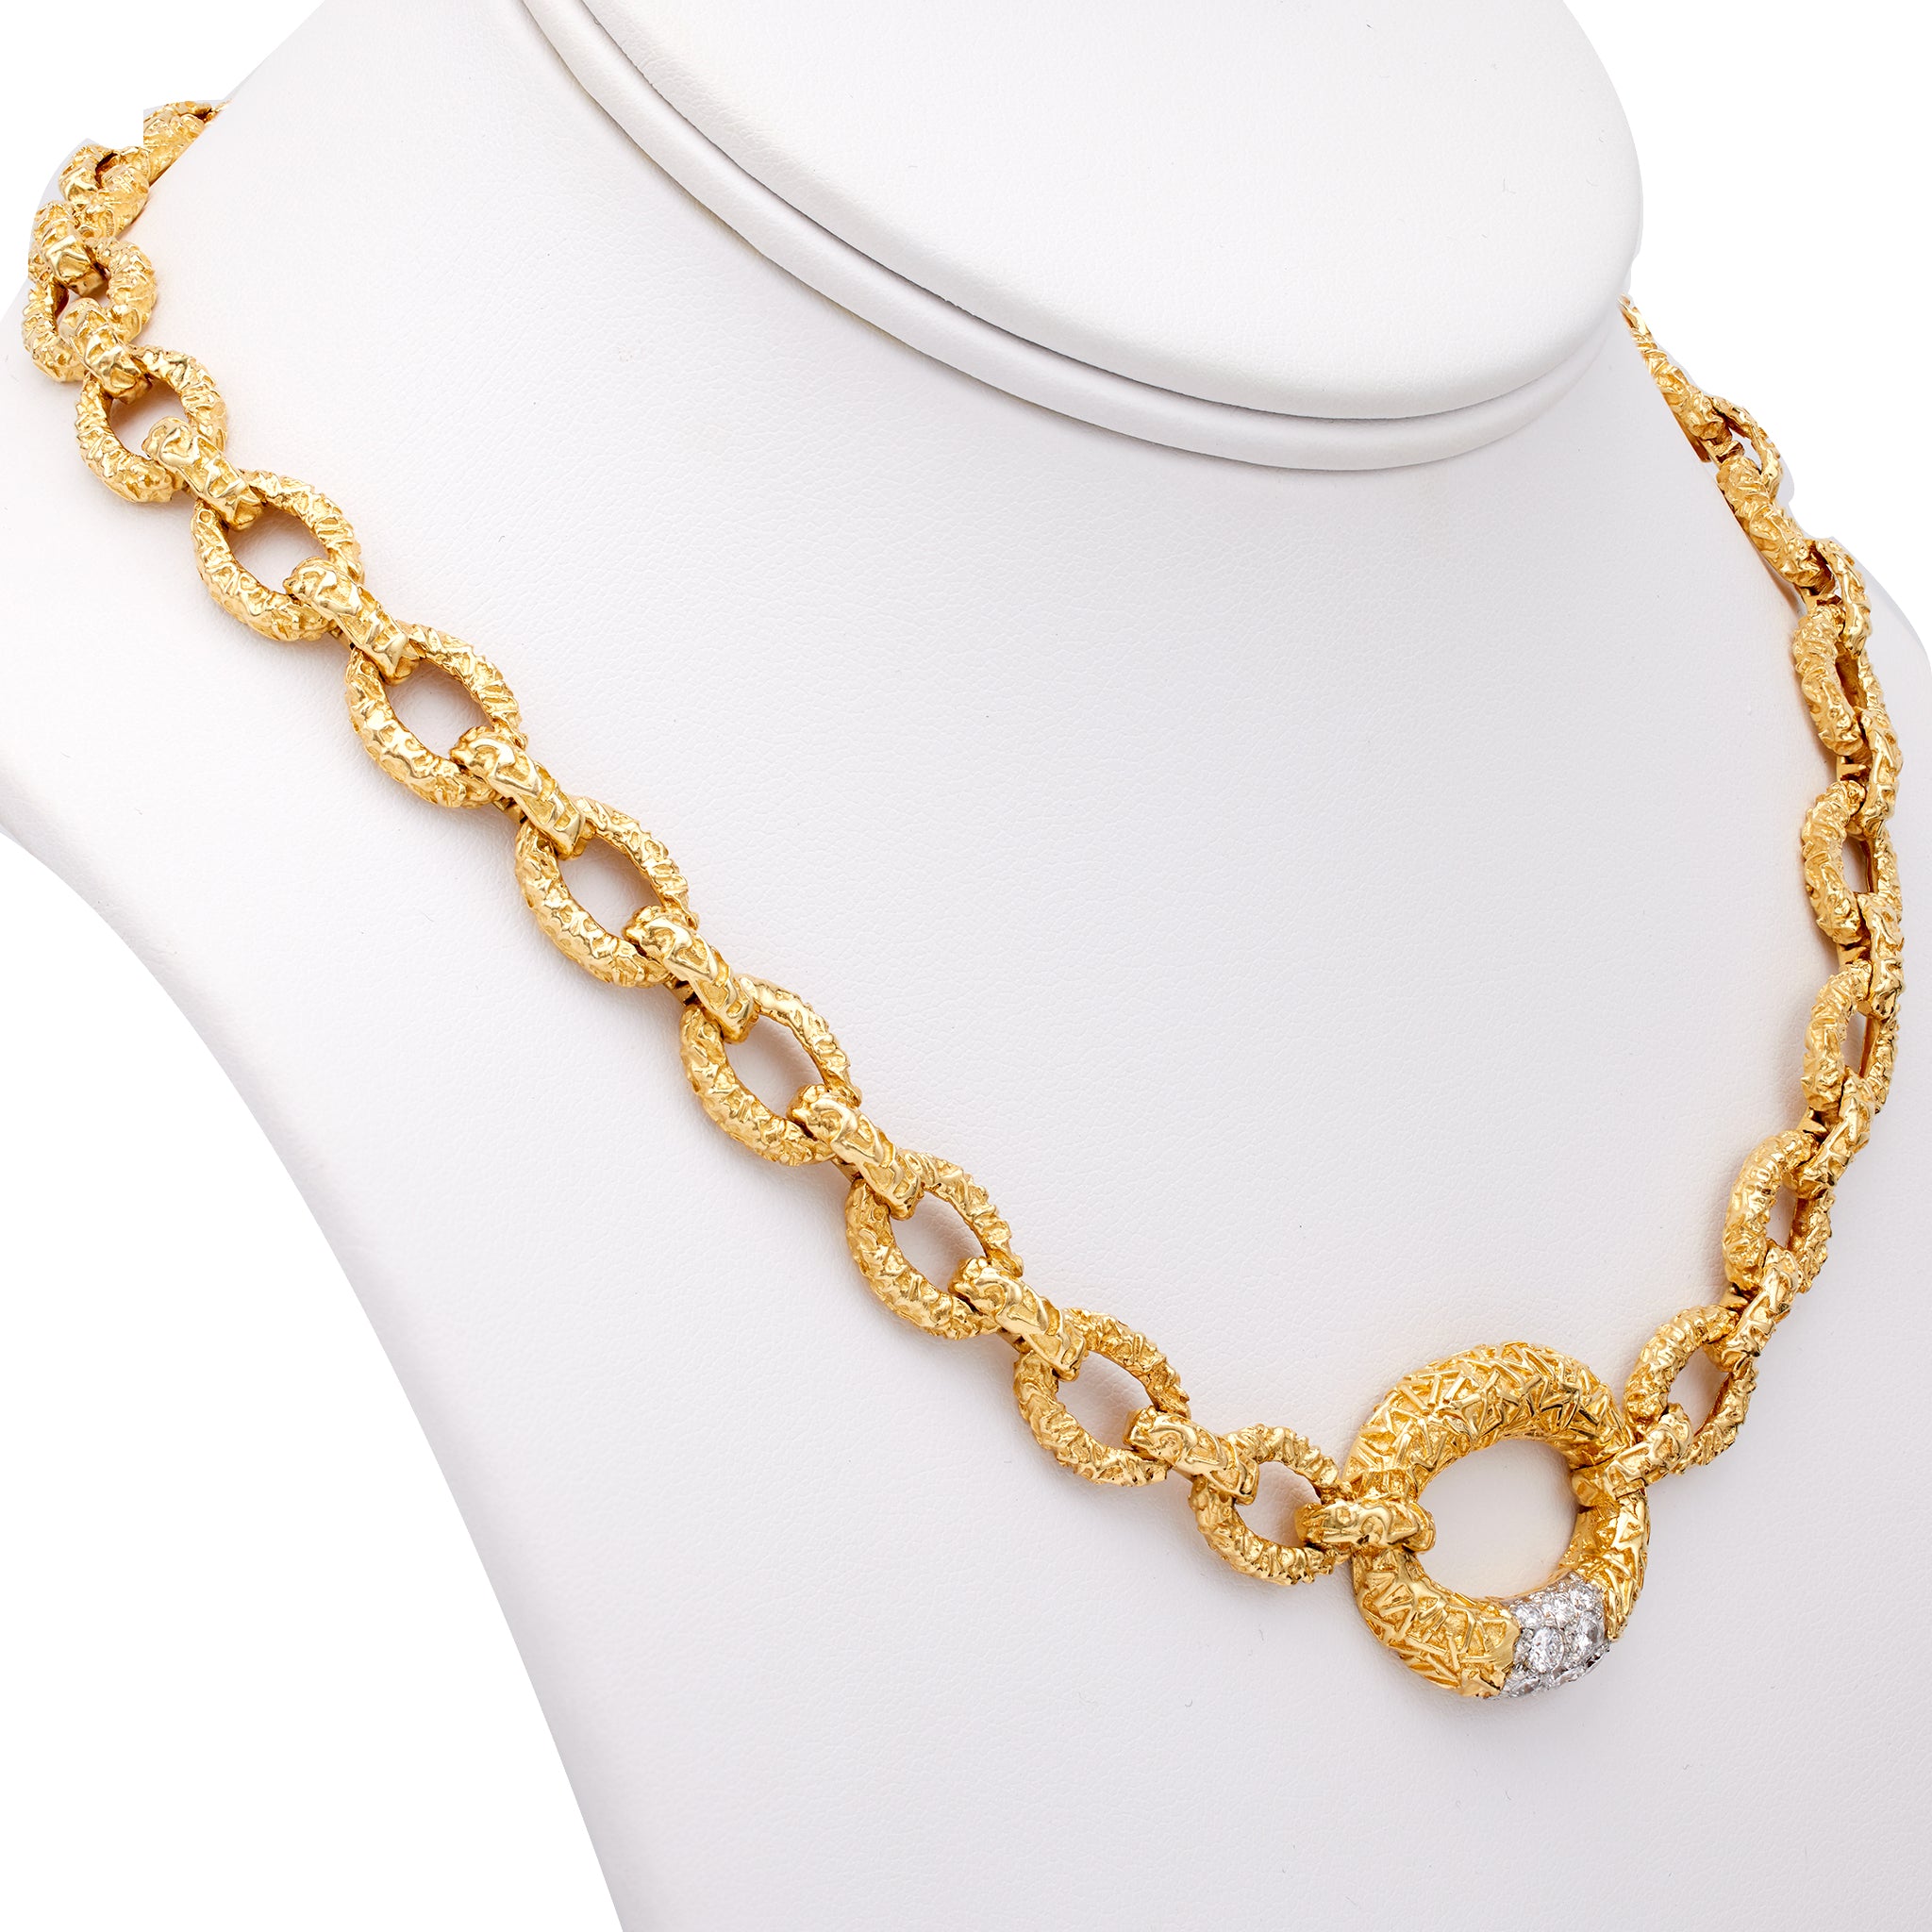 Vintage Van Cleef and Arpels Diamond 18k Yellow Gold Link Necklace Necklaces Jack Weir & Sons   